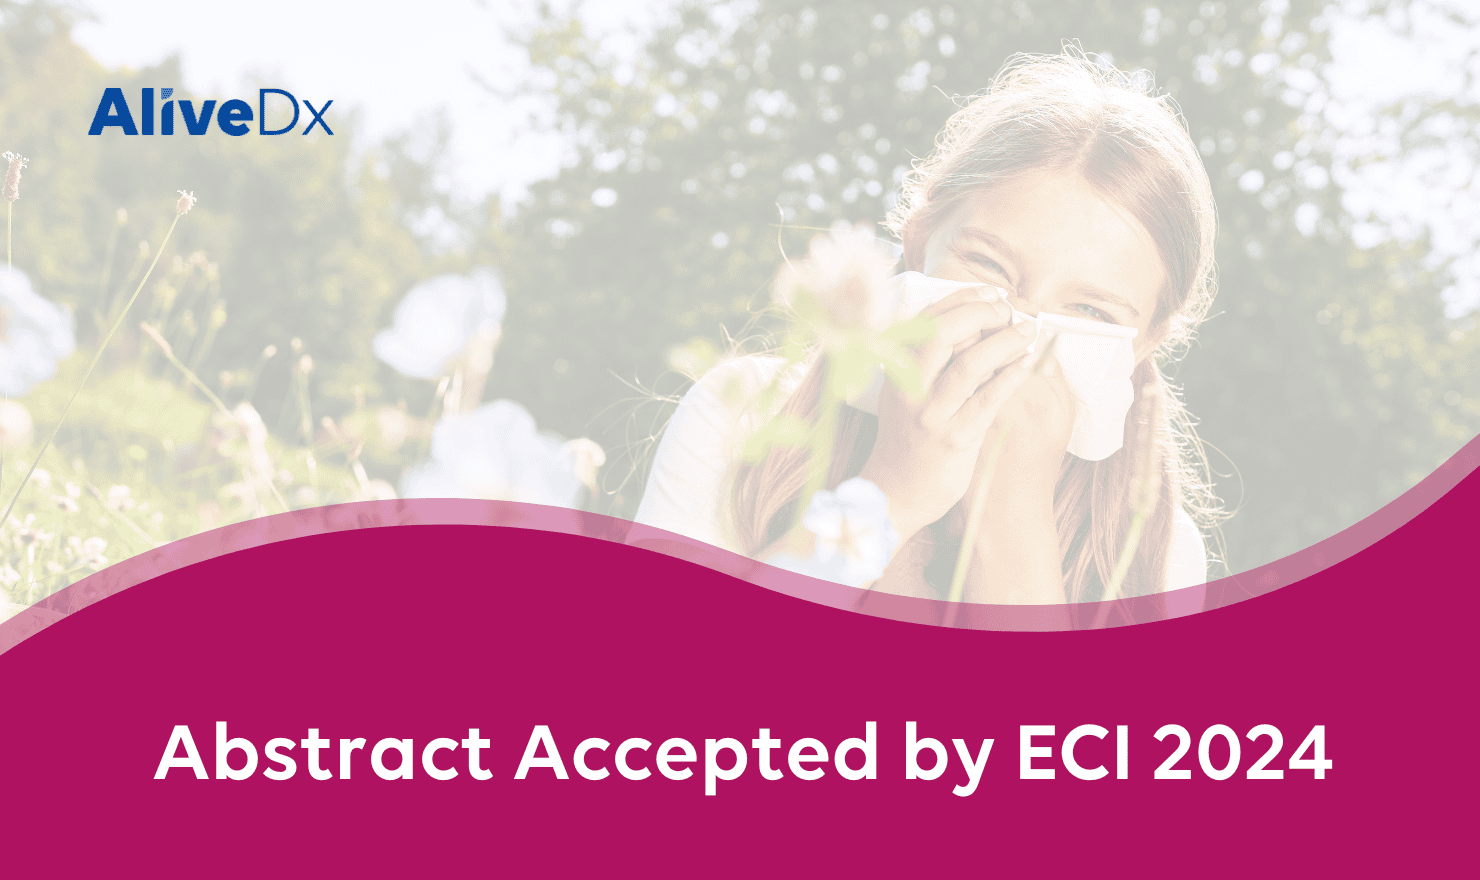 Abstract Accepted by the European Congress of Immunology (ECI 2024)